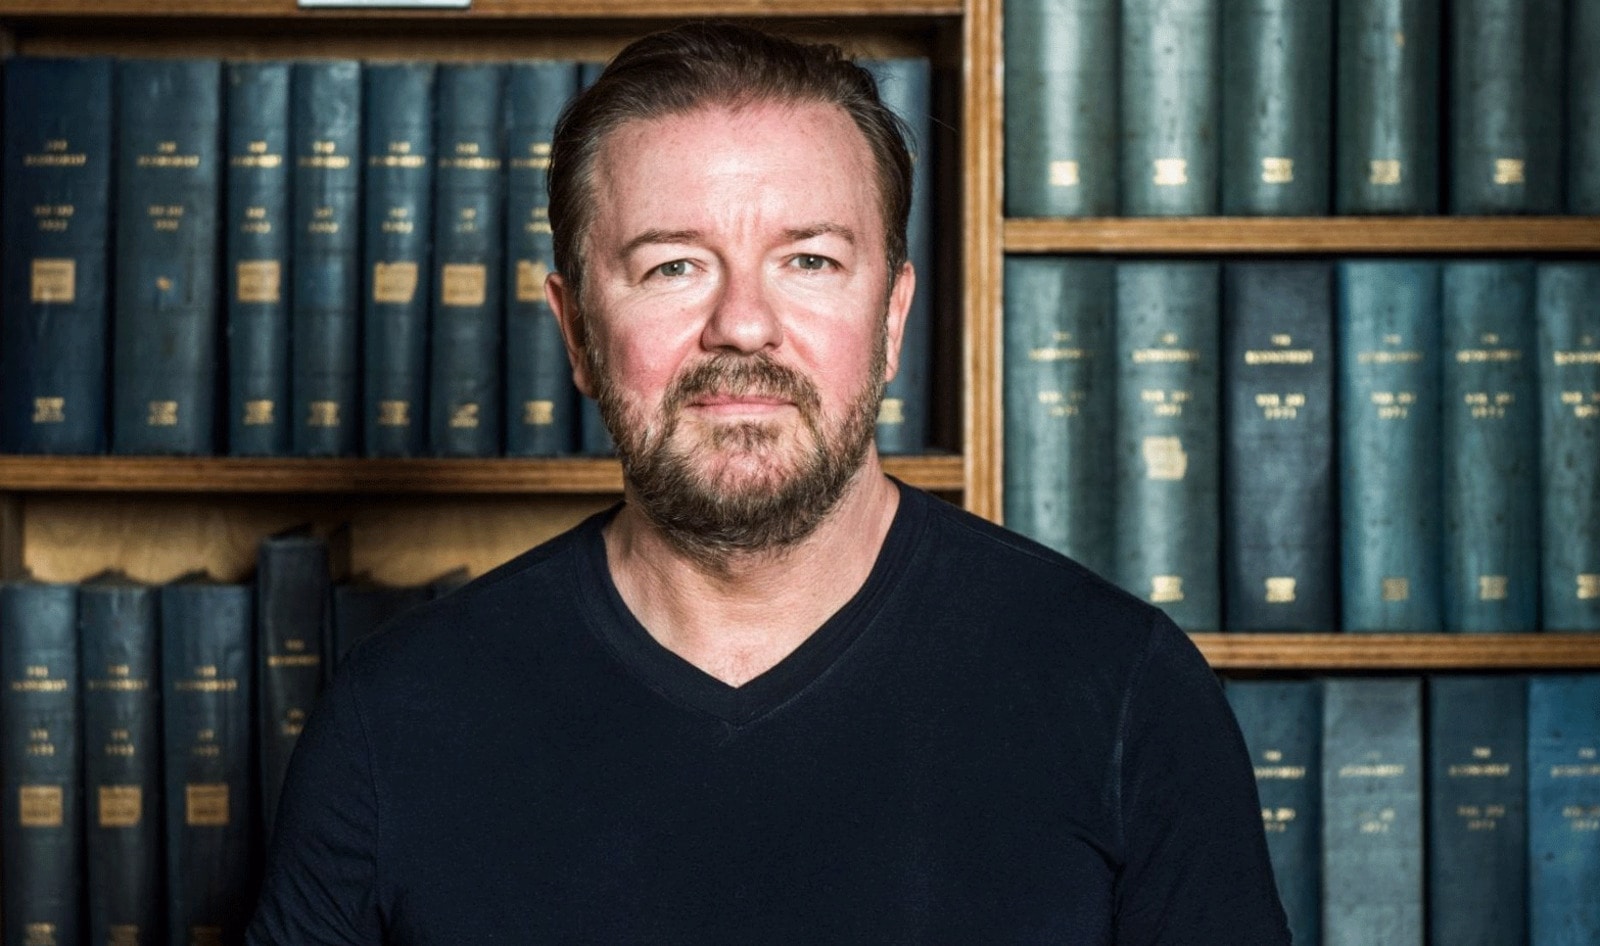 Ricky Gervais Speaks Out Against “Disgusting” Fur Industry